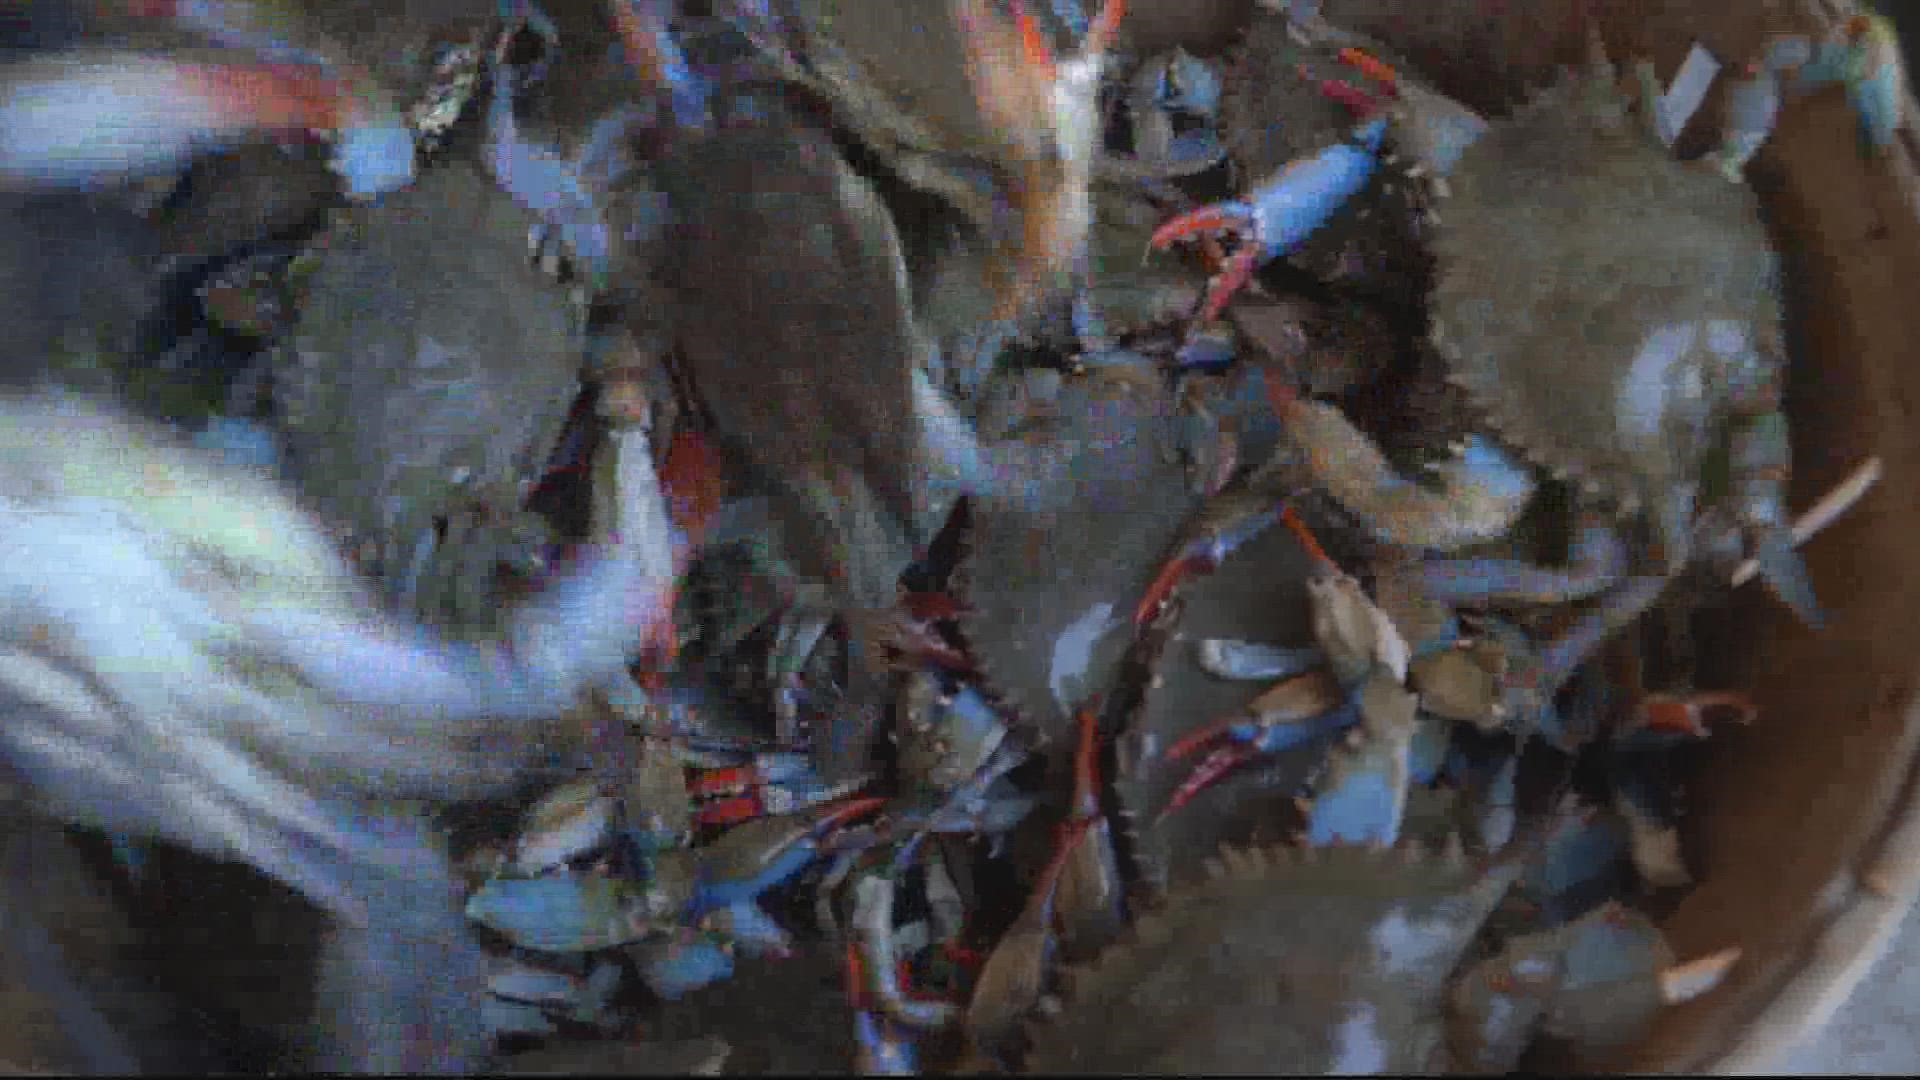 Maryland officials say the Chesapeake Bay's blue crab population is estimated to be at its lowest since an annual survey began in 1990.